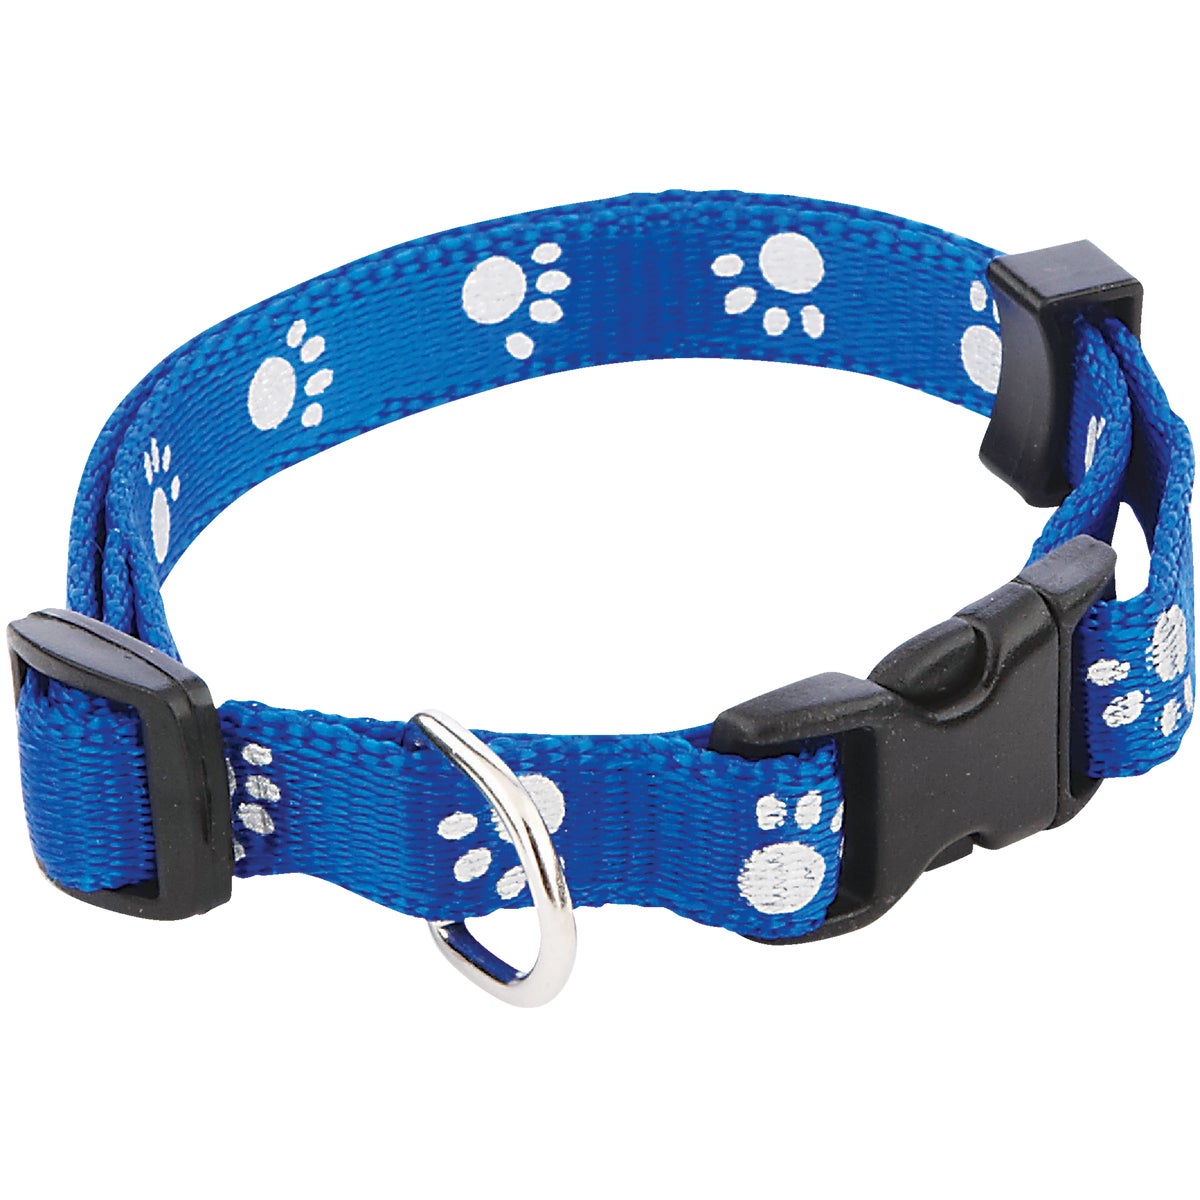 Item 810886, Durable nylon dog collar with a fun paw print style.